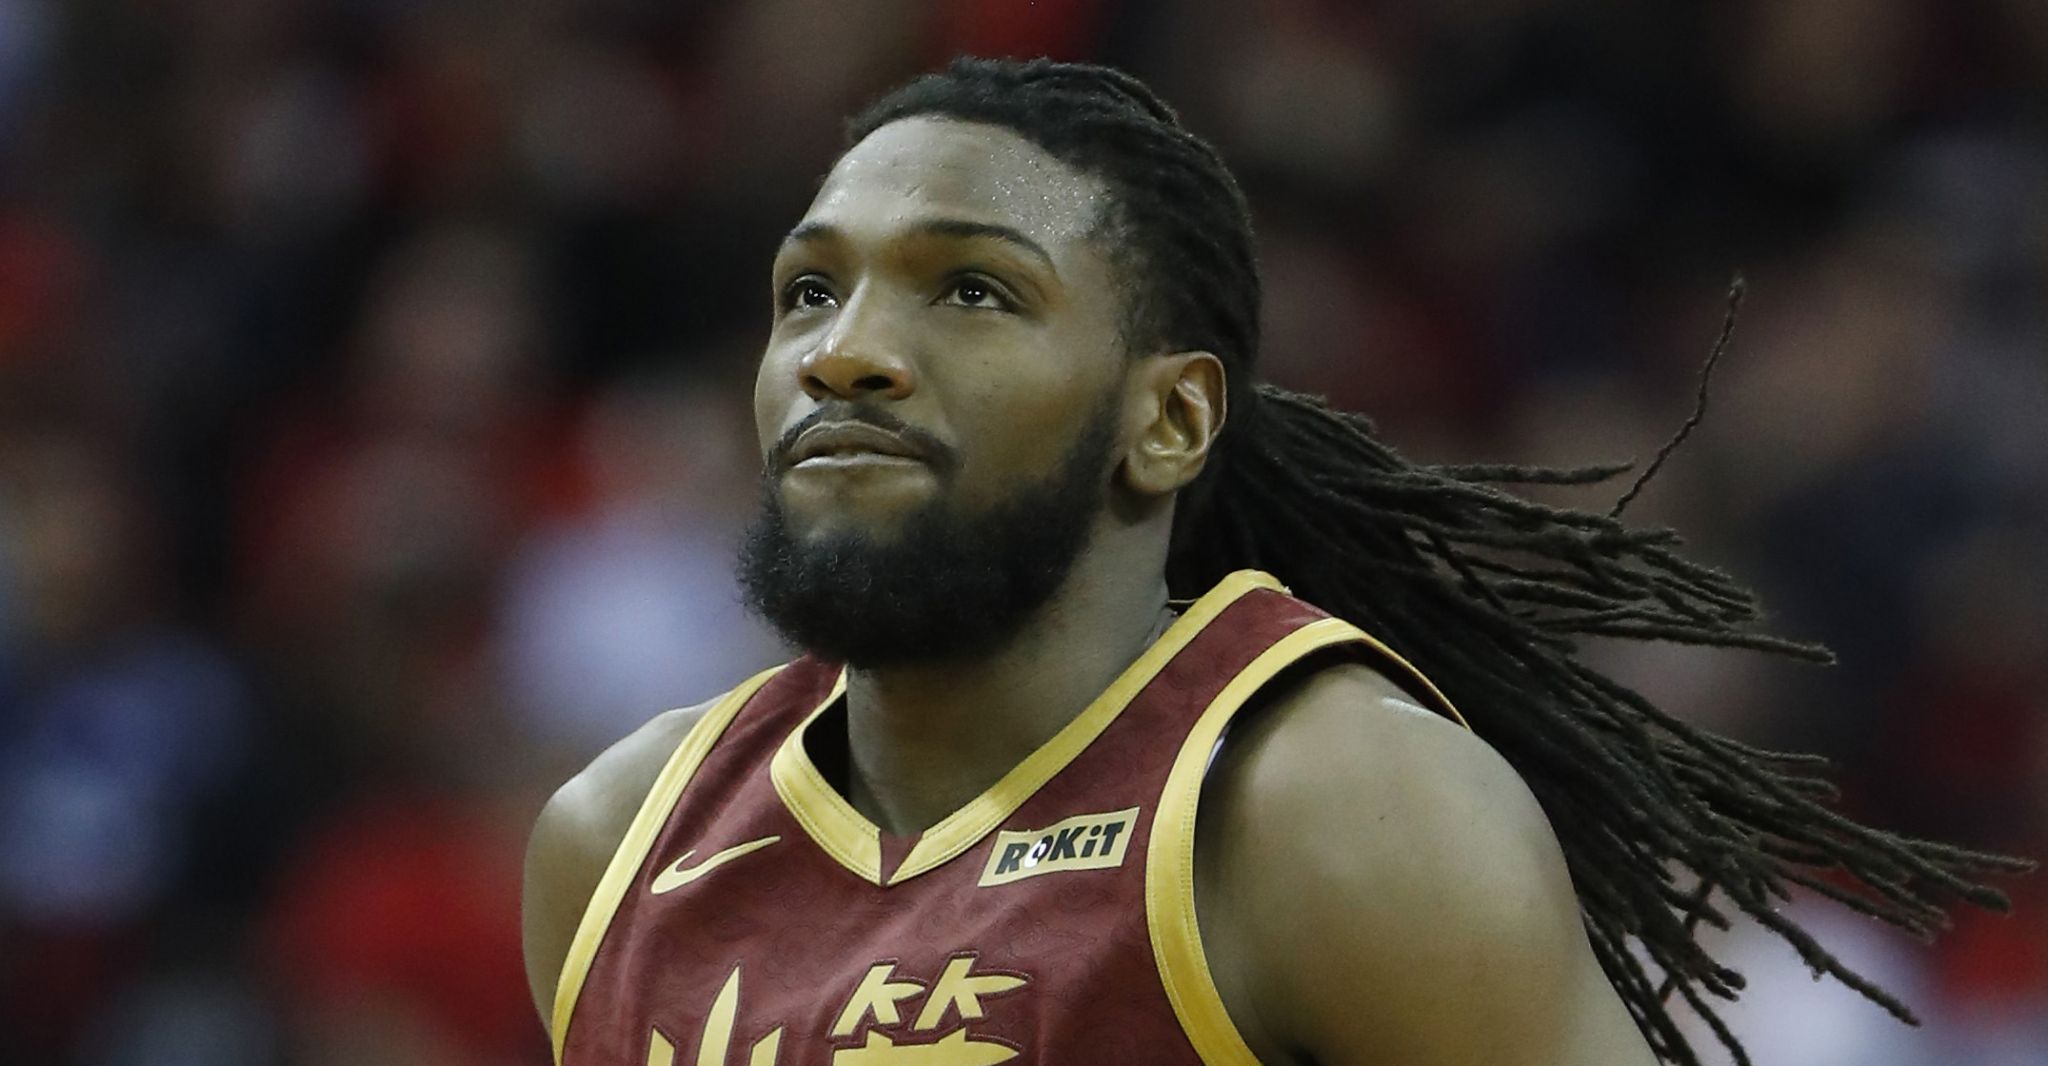 Kenneth Faried 'not well liked' within Nuggets organization